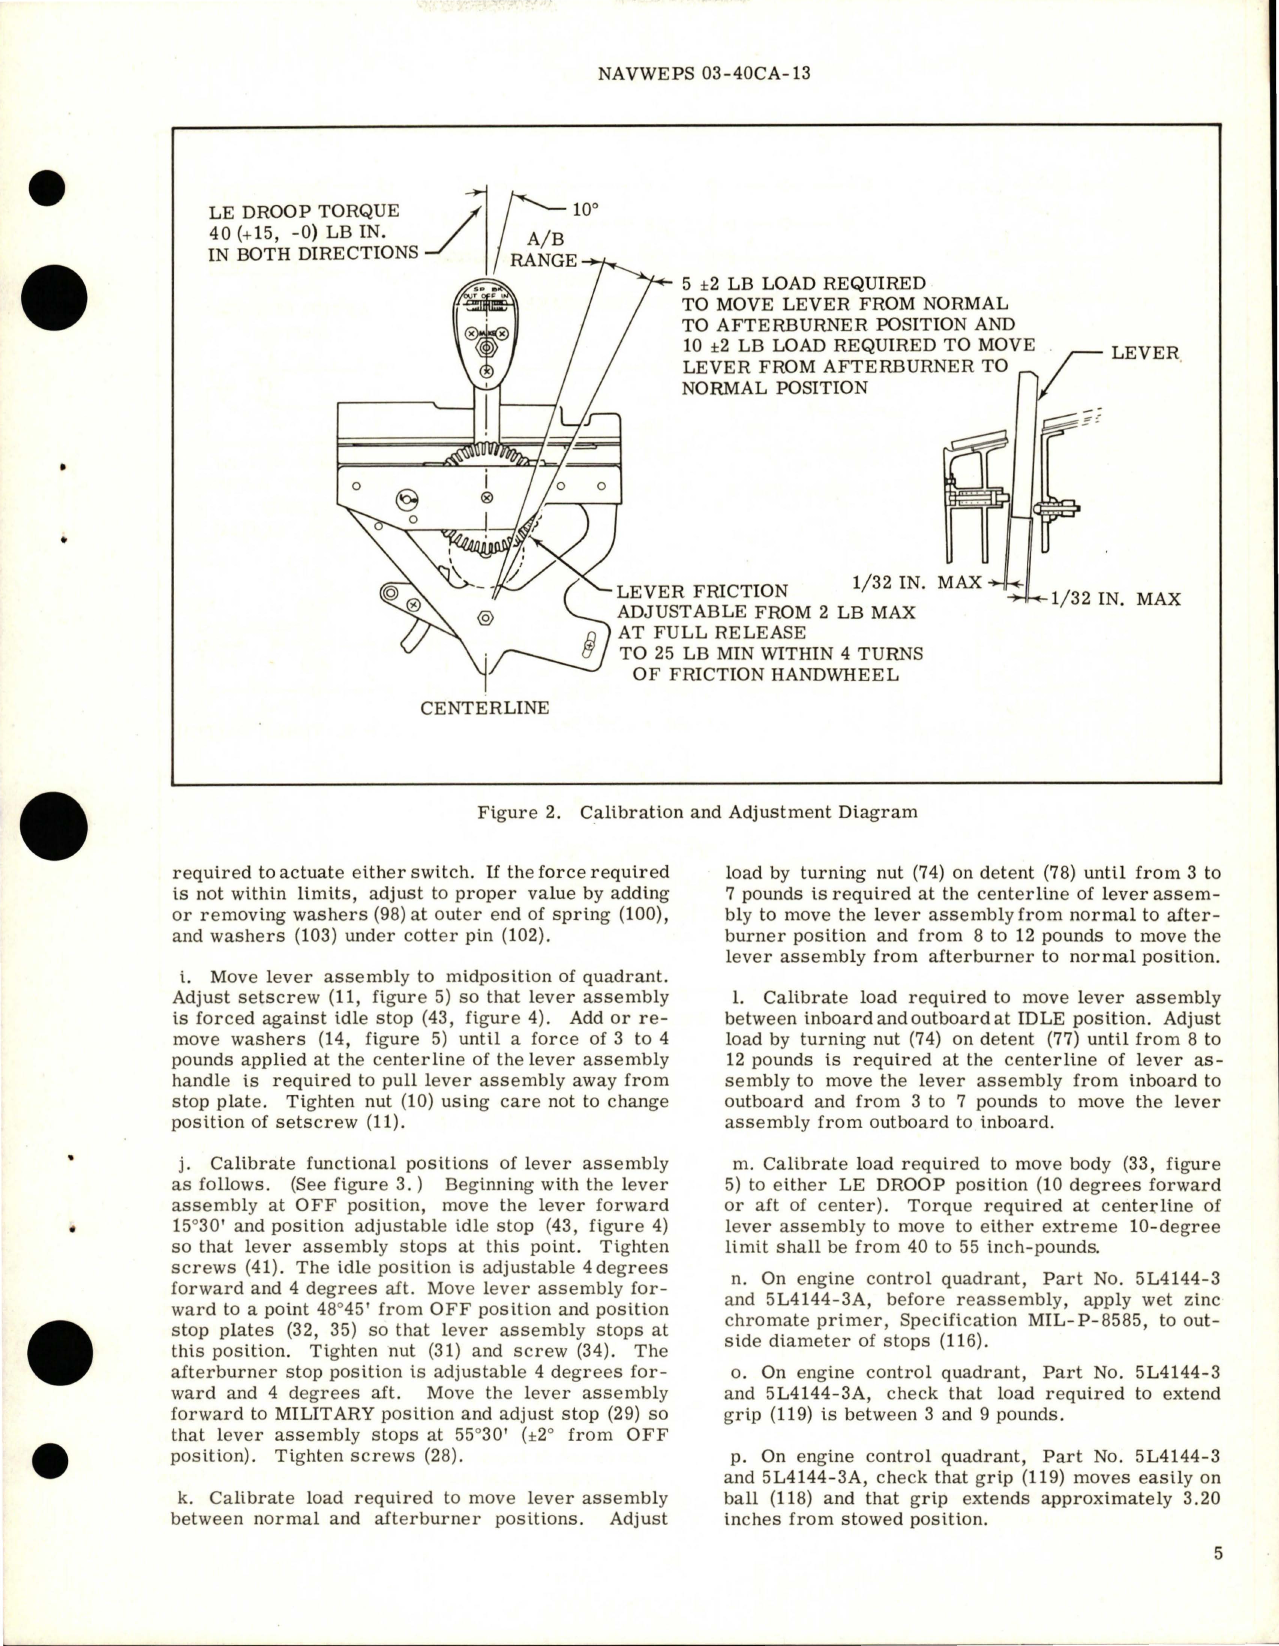 Sample page 7 from AirCorps Library document: Overhaul Instructions with Parts Breakdown for Engine Control Quadrant